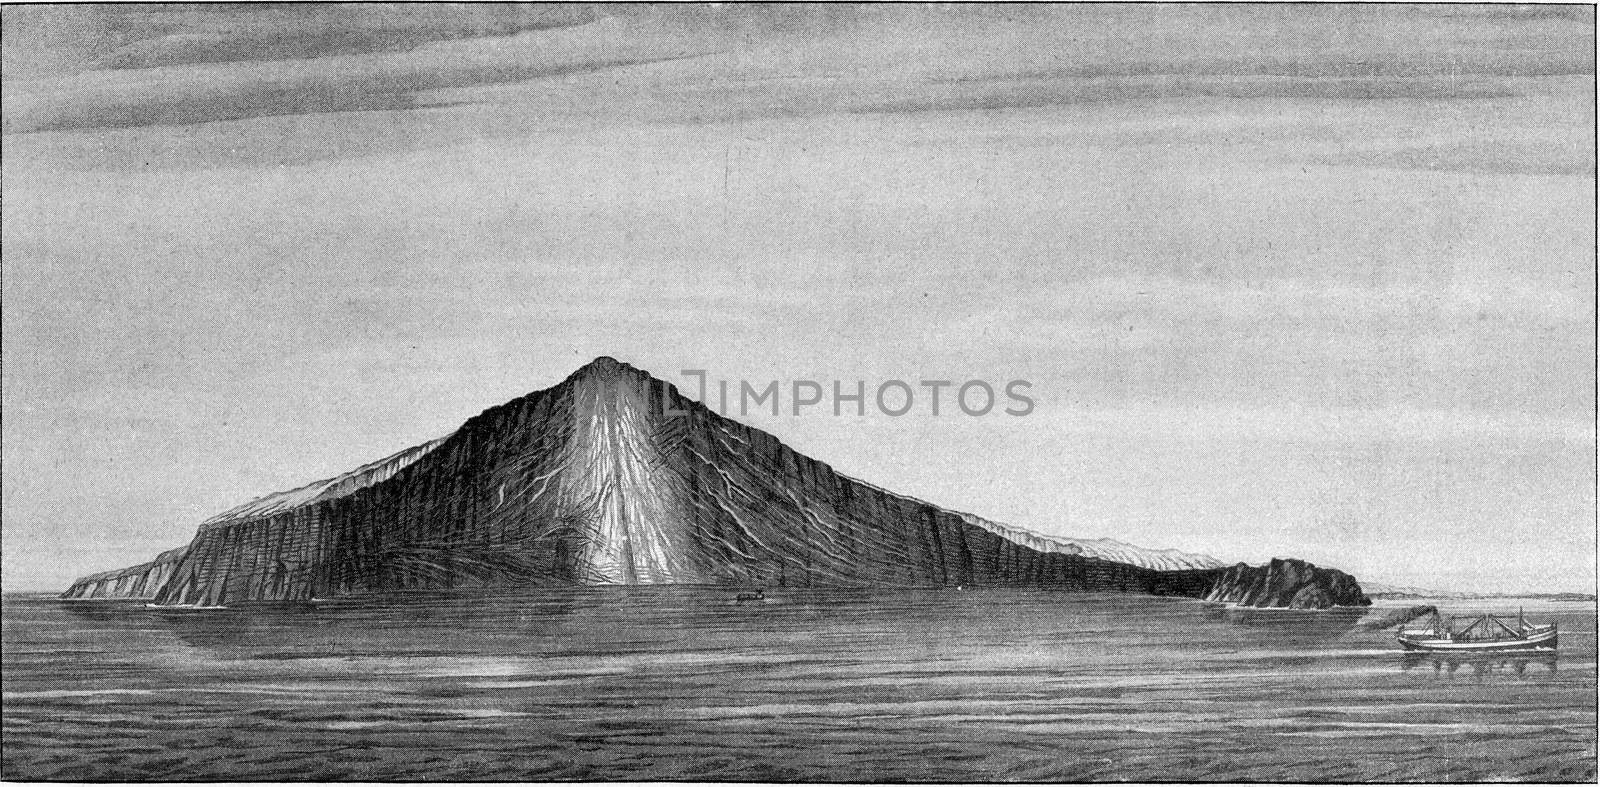 Trench produced by the eruption of 1883 Krakatoa volcano in the Strait of Sunda, vintage engraved illustration. From the Universe and Humanity, 1910.
